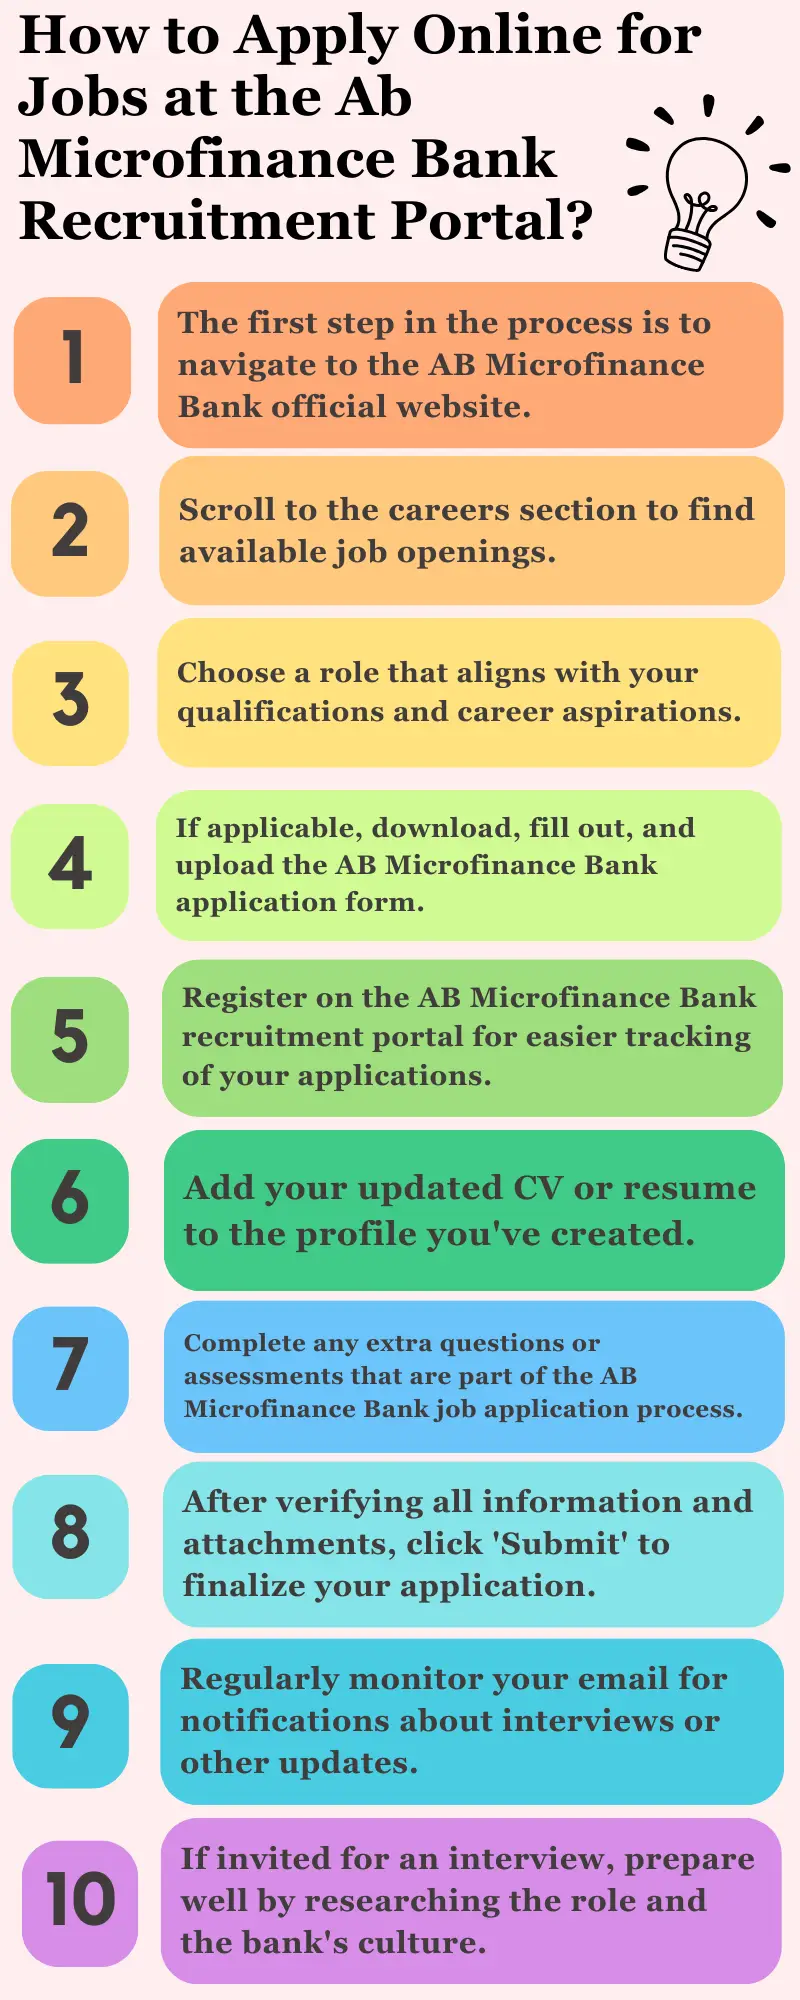 How to Apply Online for Jobs at the Ab Microfinance Bank Recruitment Portal?